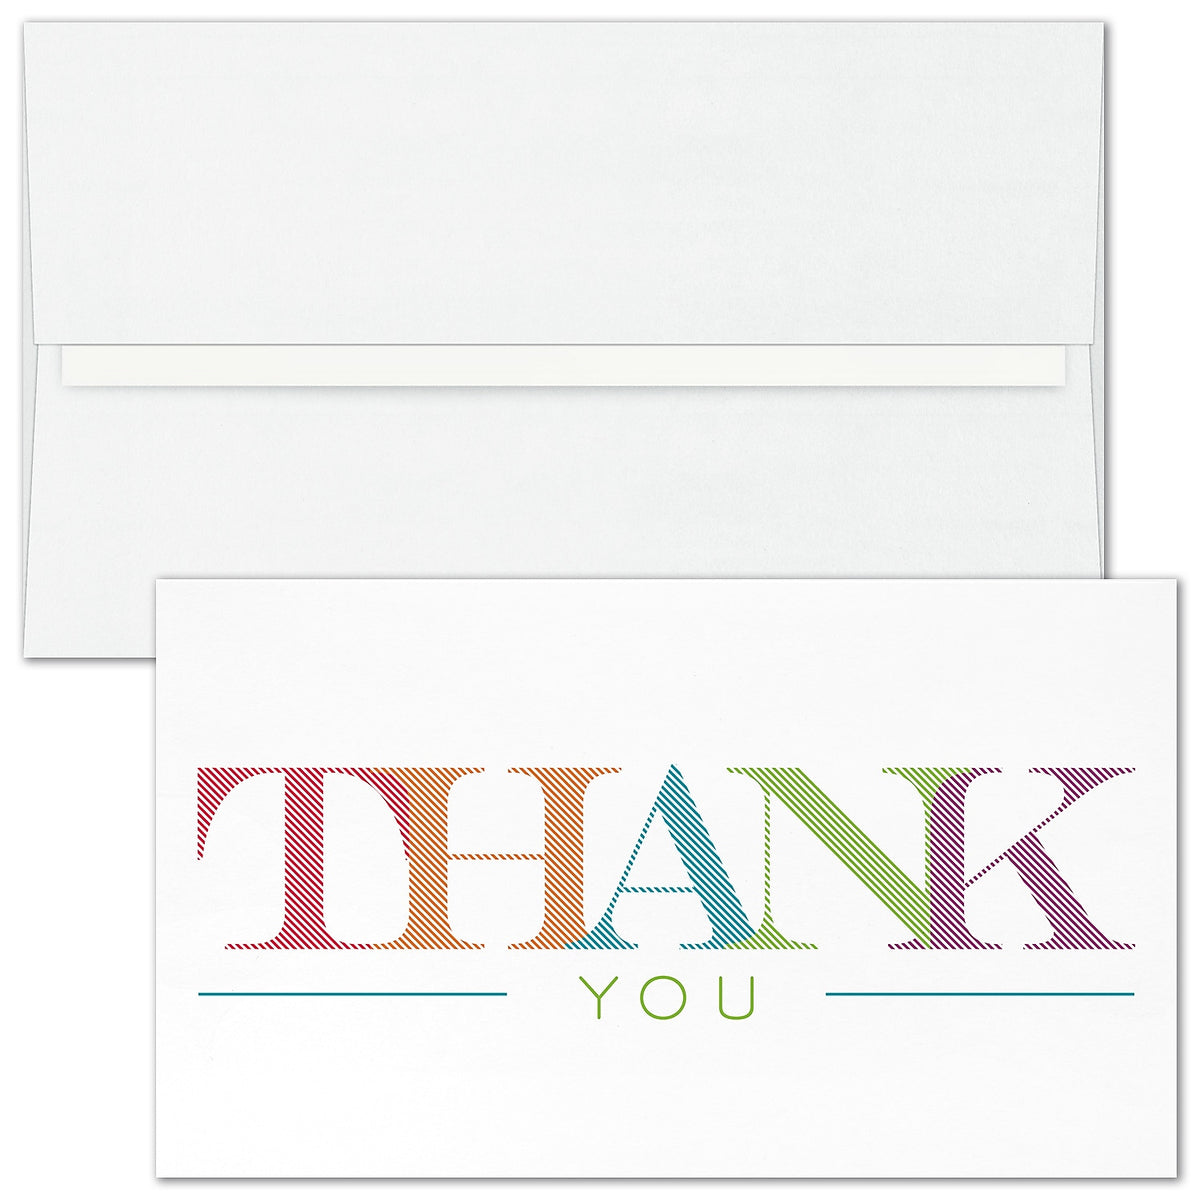 "Colorful Thank You" Card w/ White Unlined Envelope, 250/BX